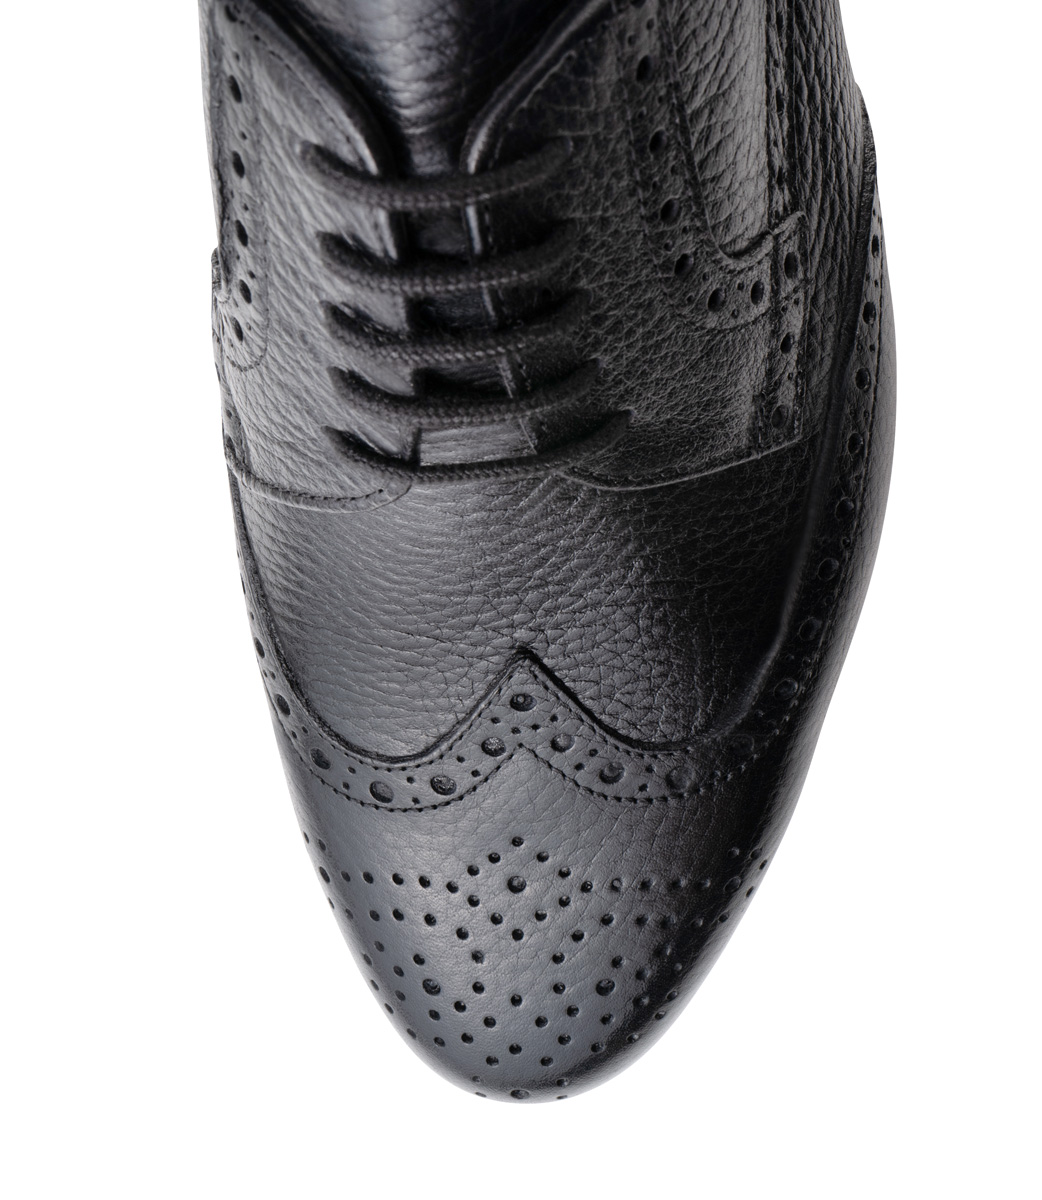 View of the 4-fold lacing of the Werner Kern men's dance shoe